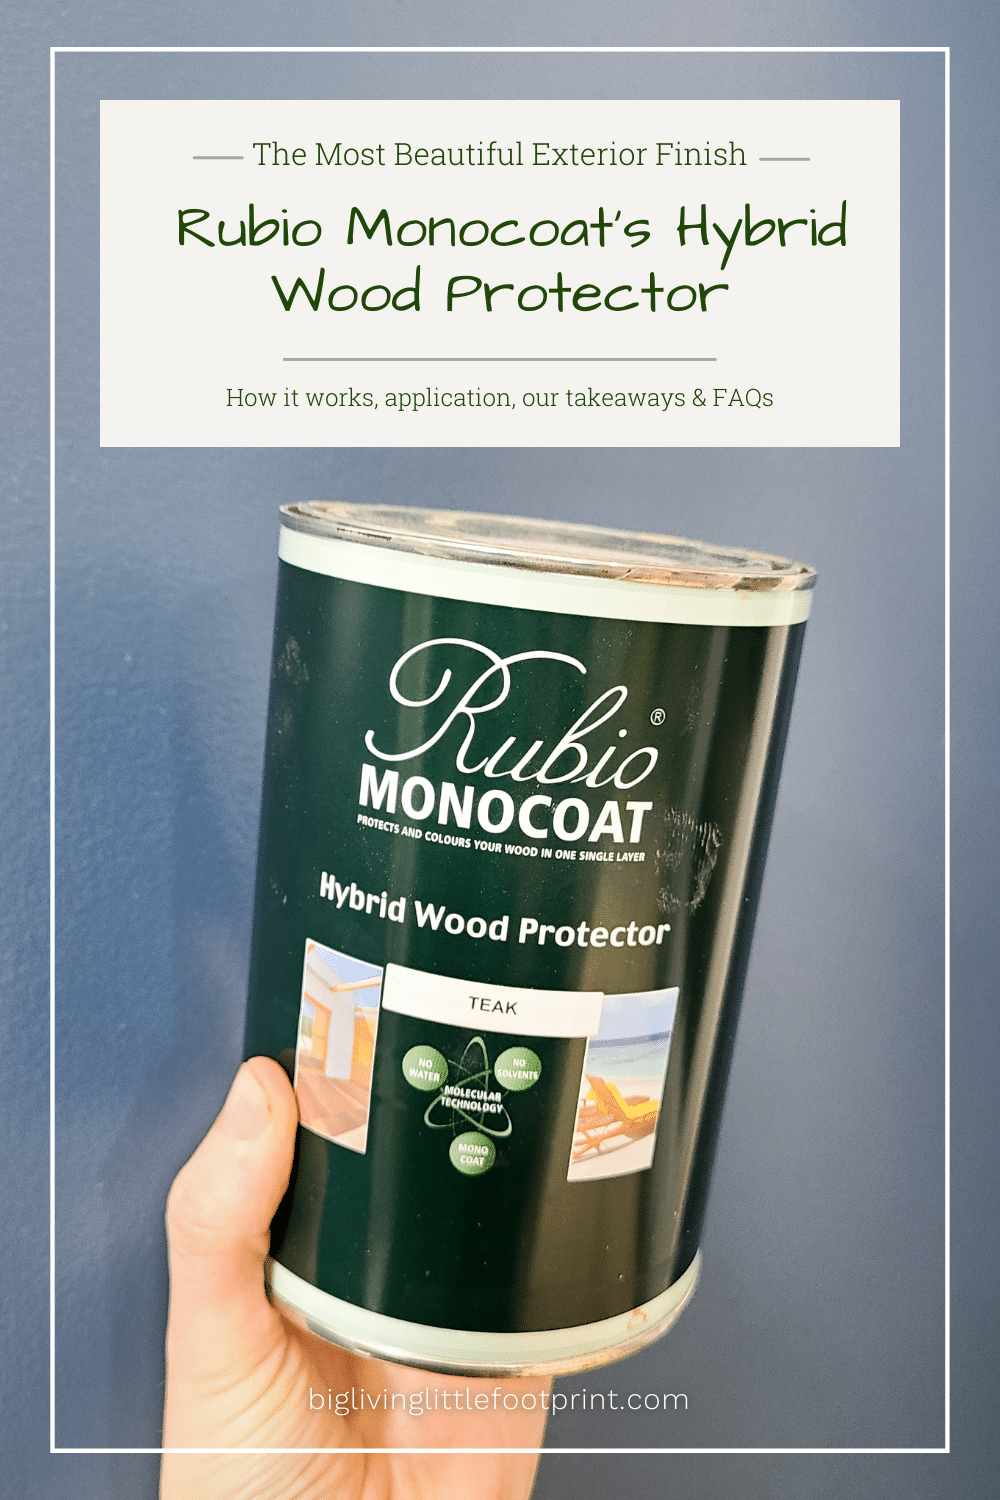 Rubio Monocoat’s Hybrid Wood Protector: The Most Beautiful Exterior Wood Finish